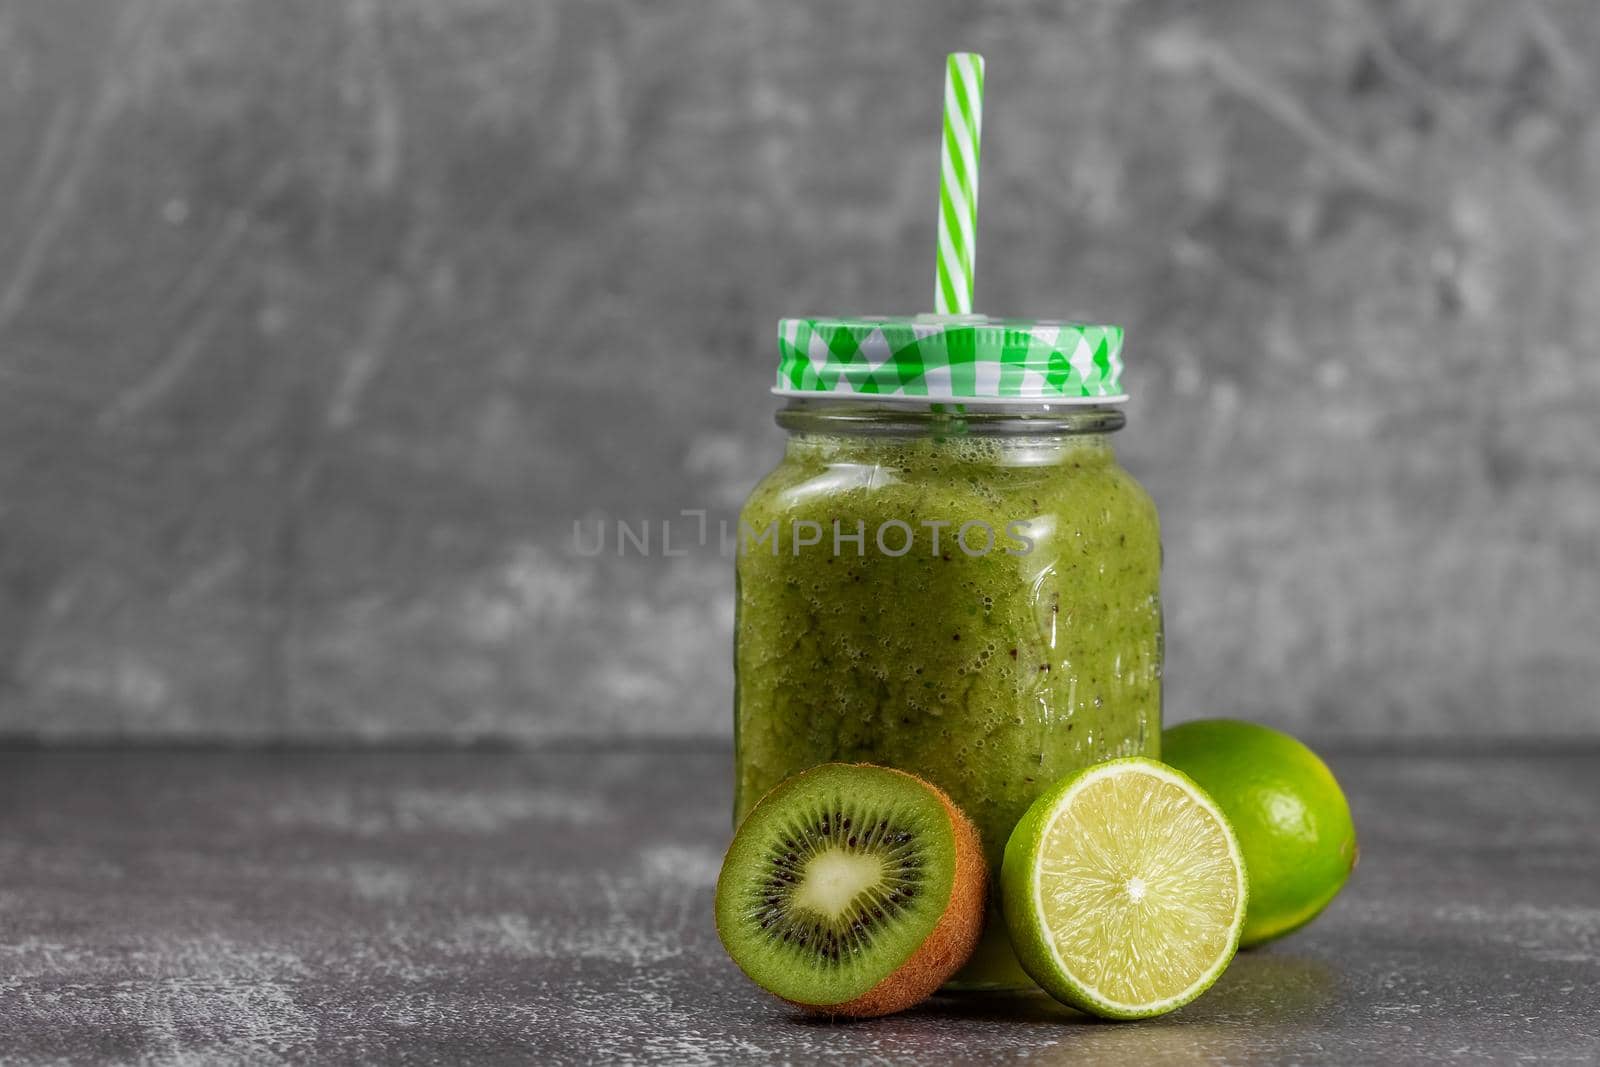 Step 5. Jar a mug with ready-made banana, kiwi and spinach smoothie with apple juice. Fresh citrus fruits and kiwis lie next to the jar